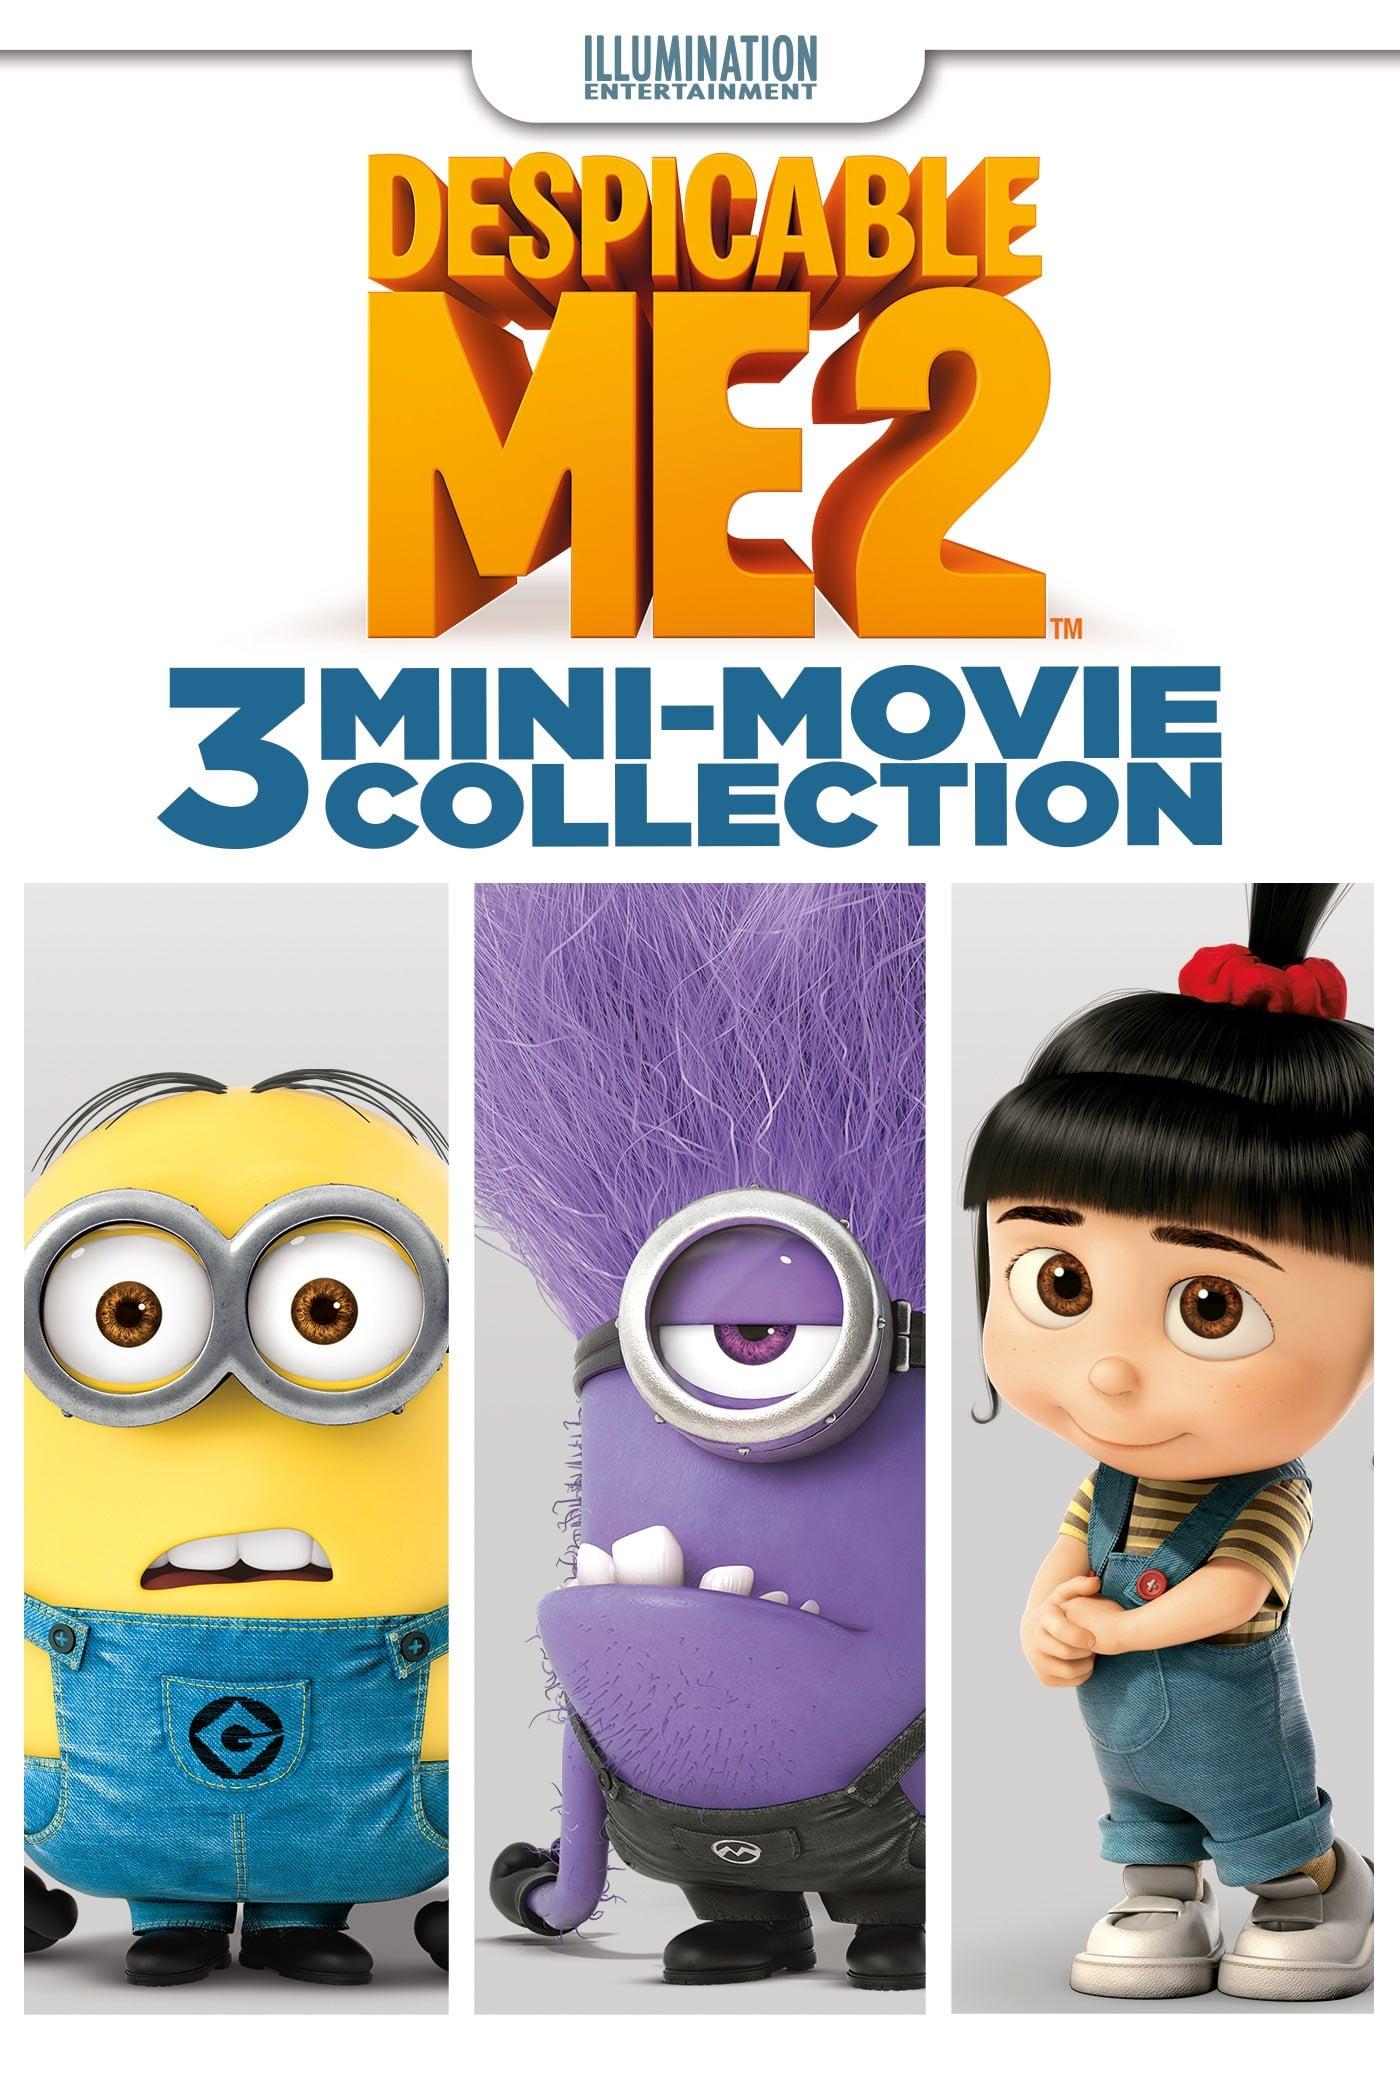 Despicable Me 2: 3 Mini-Movie Collection poster